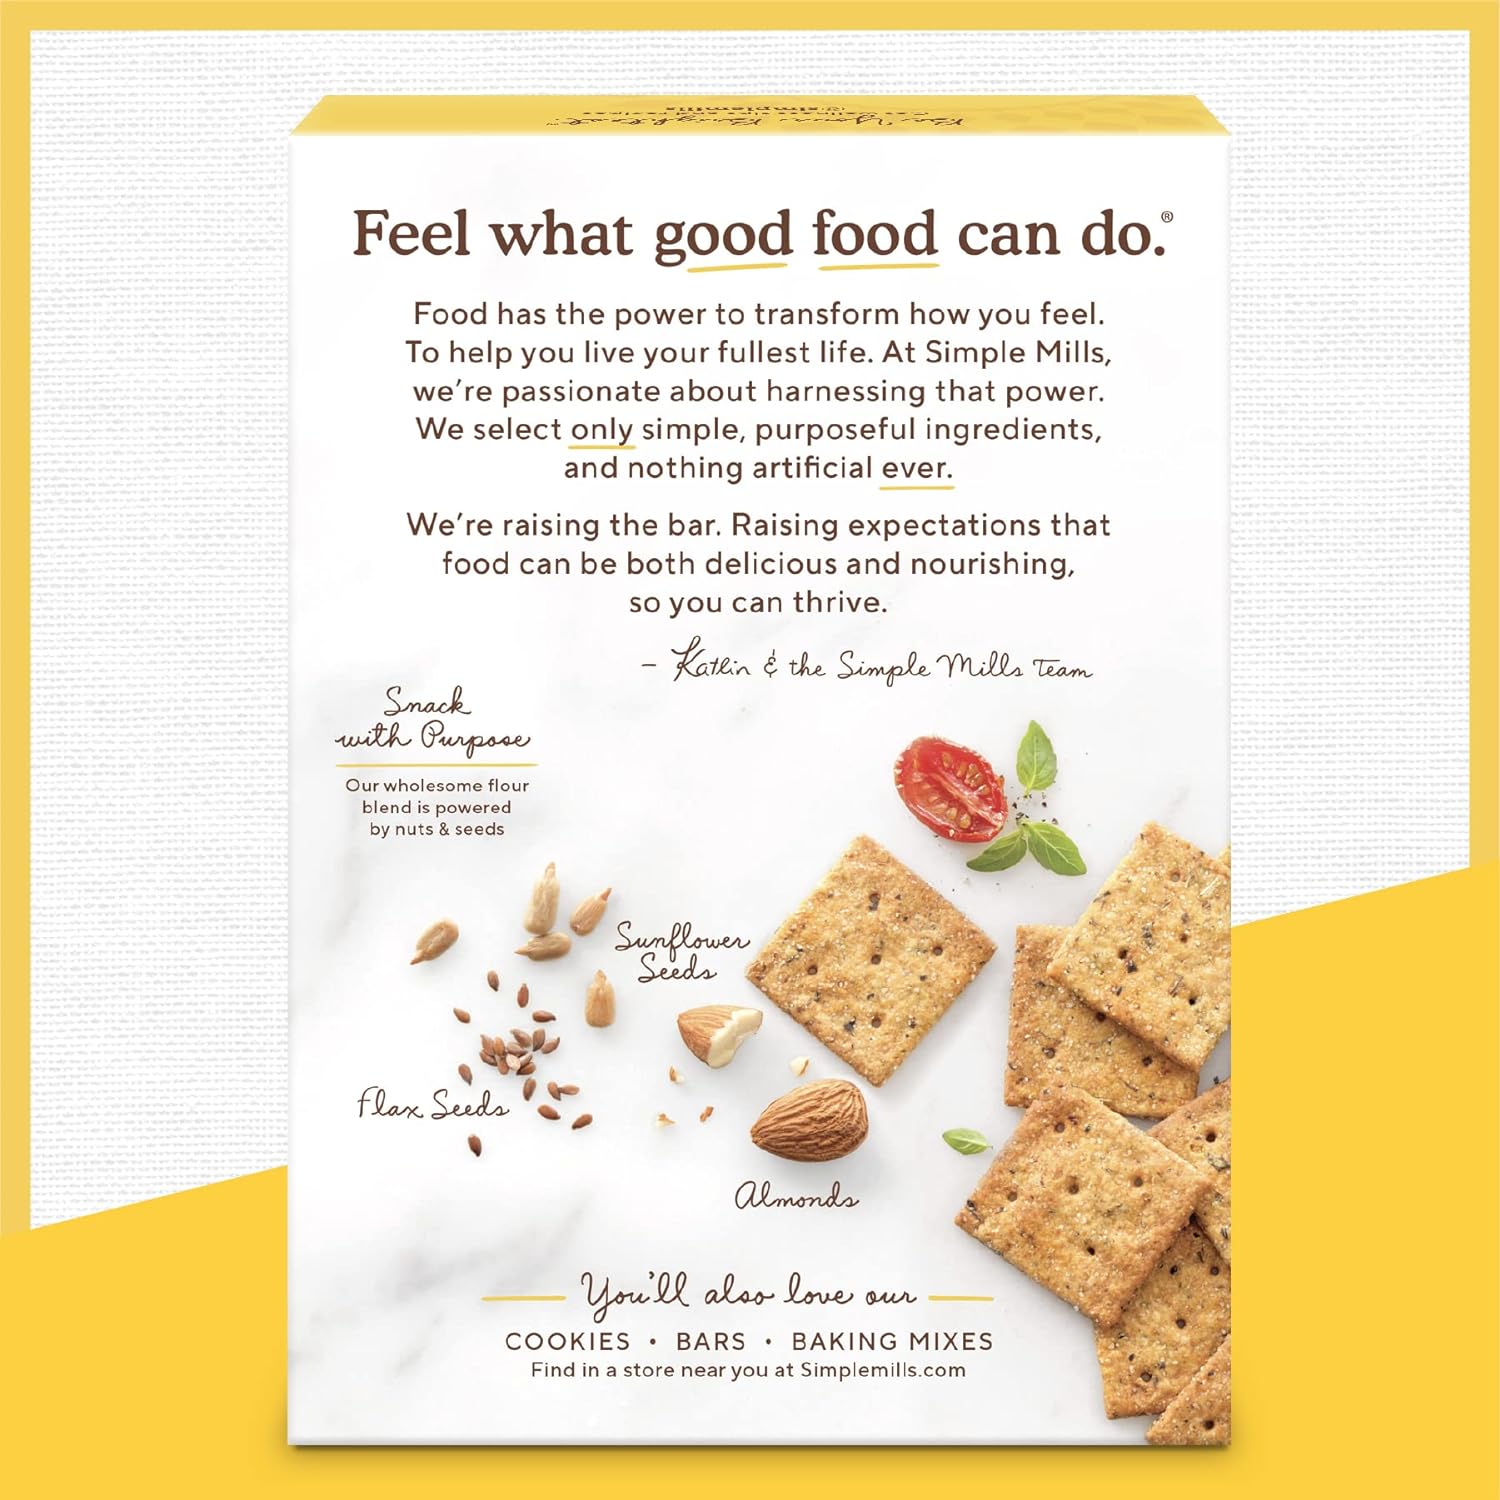 Simple Mills Almond Flour Crackers, Sundried Tomato & Basil - Gluten Free, Vegan, Healthy Snacks, Plant Based, 4.25 Ounce (Pack of 6)